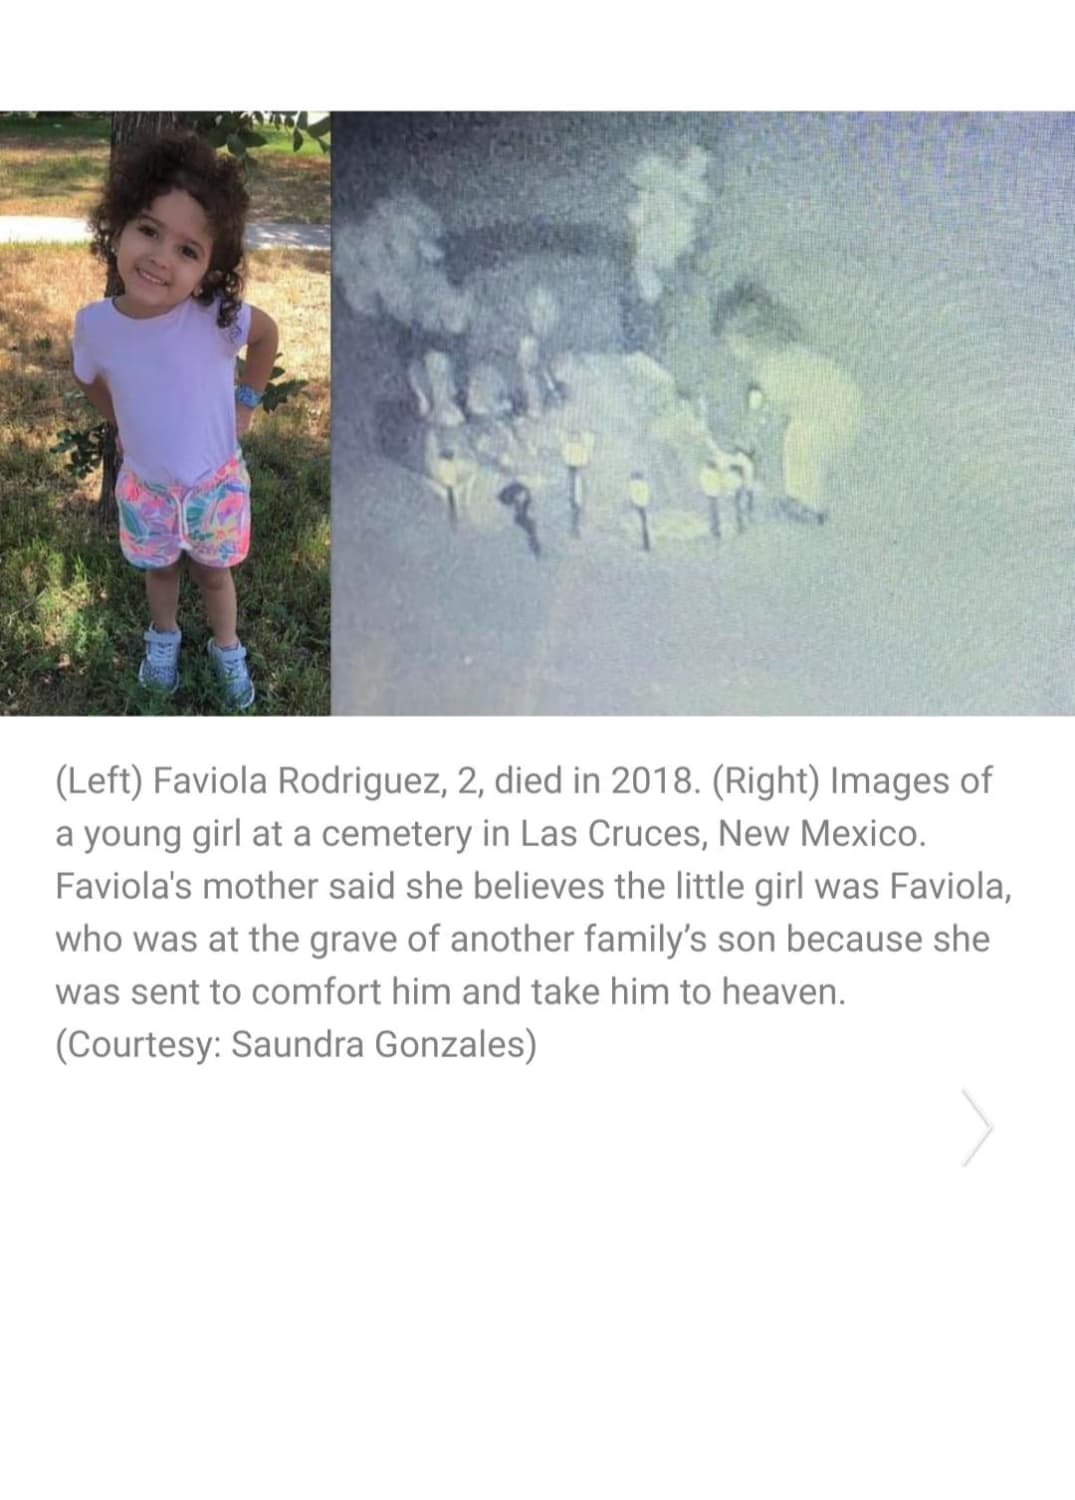 Video captured a little girl in the middle of the night roaming a Graveyard in New Mexico. Mother suspects it's her late daughter.